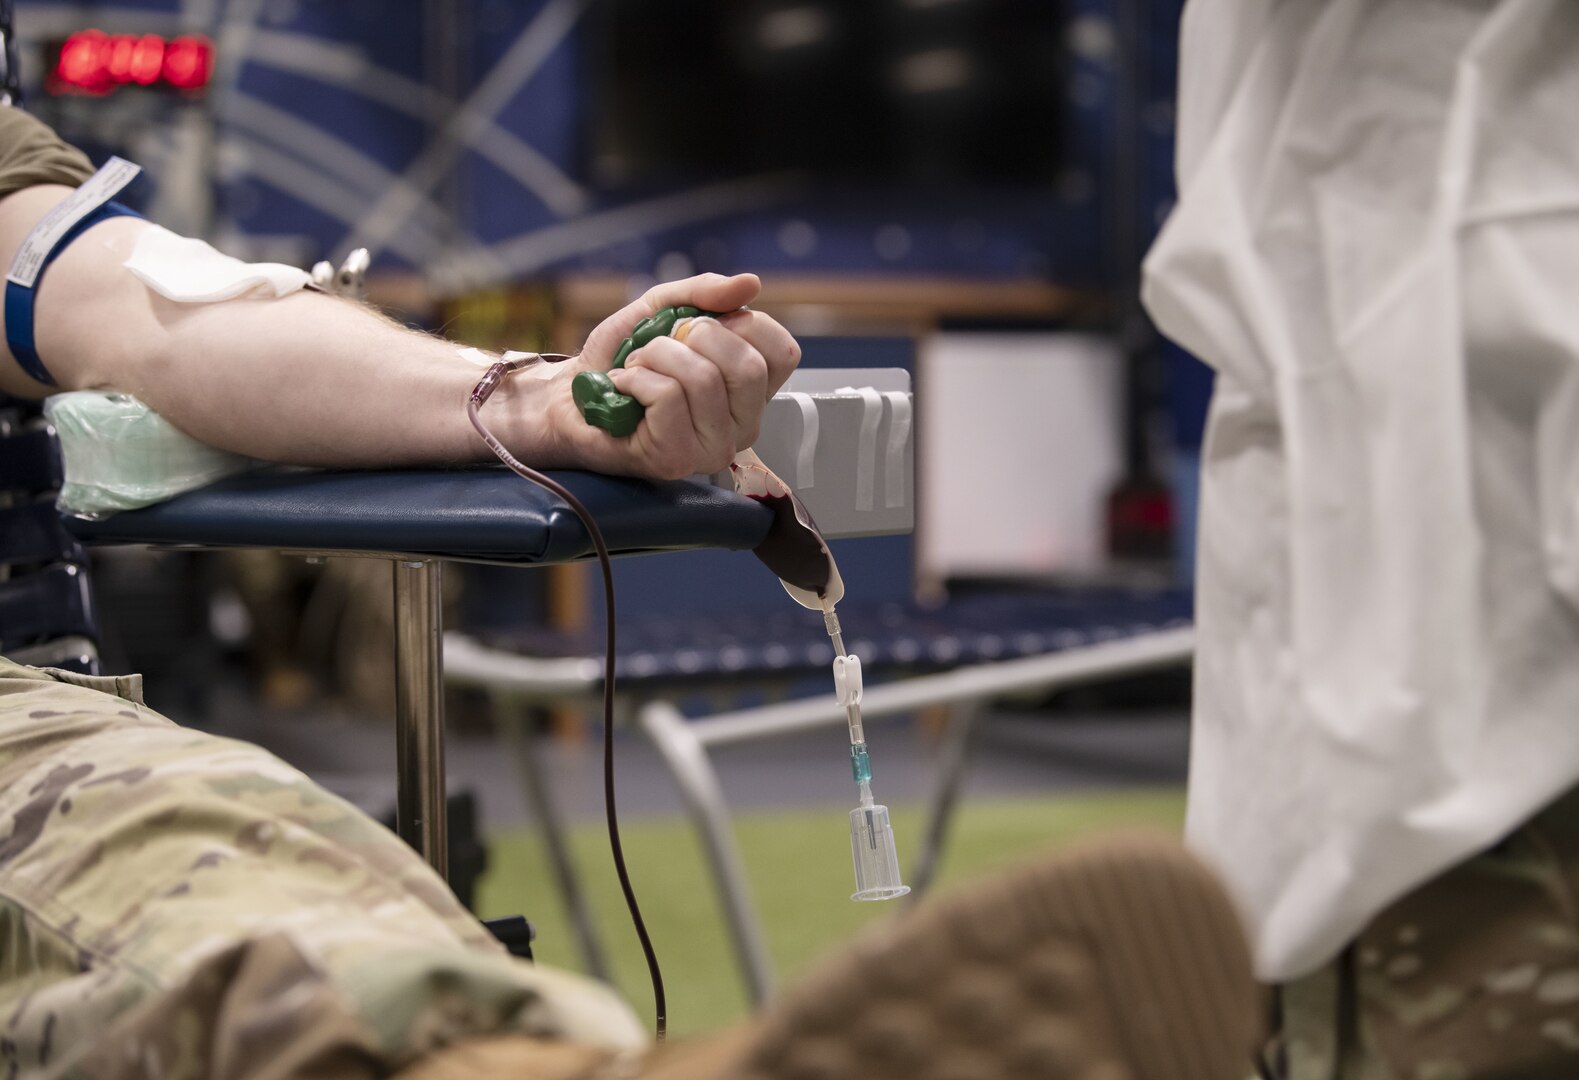 The Commission on Accreditation of Allied Health Education Programs (CAAHEP) recently reaccredited the Armed Services Blood Bank Fellowship Specialist in Blood Banking program at Walter Reed for another five years.